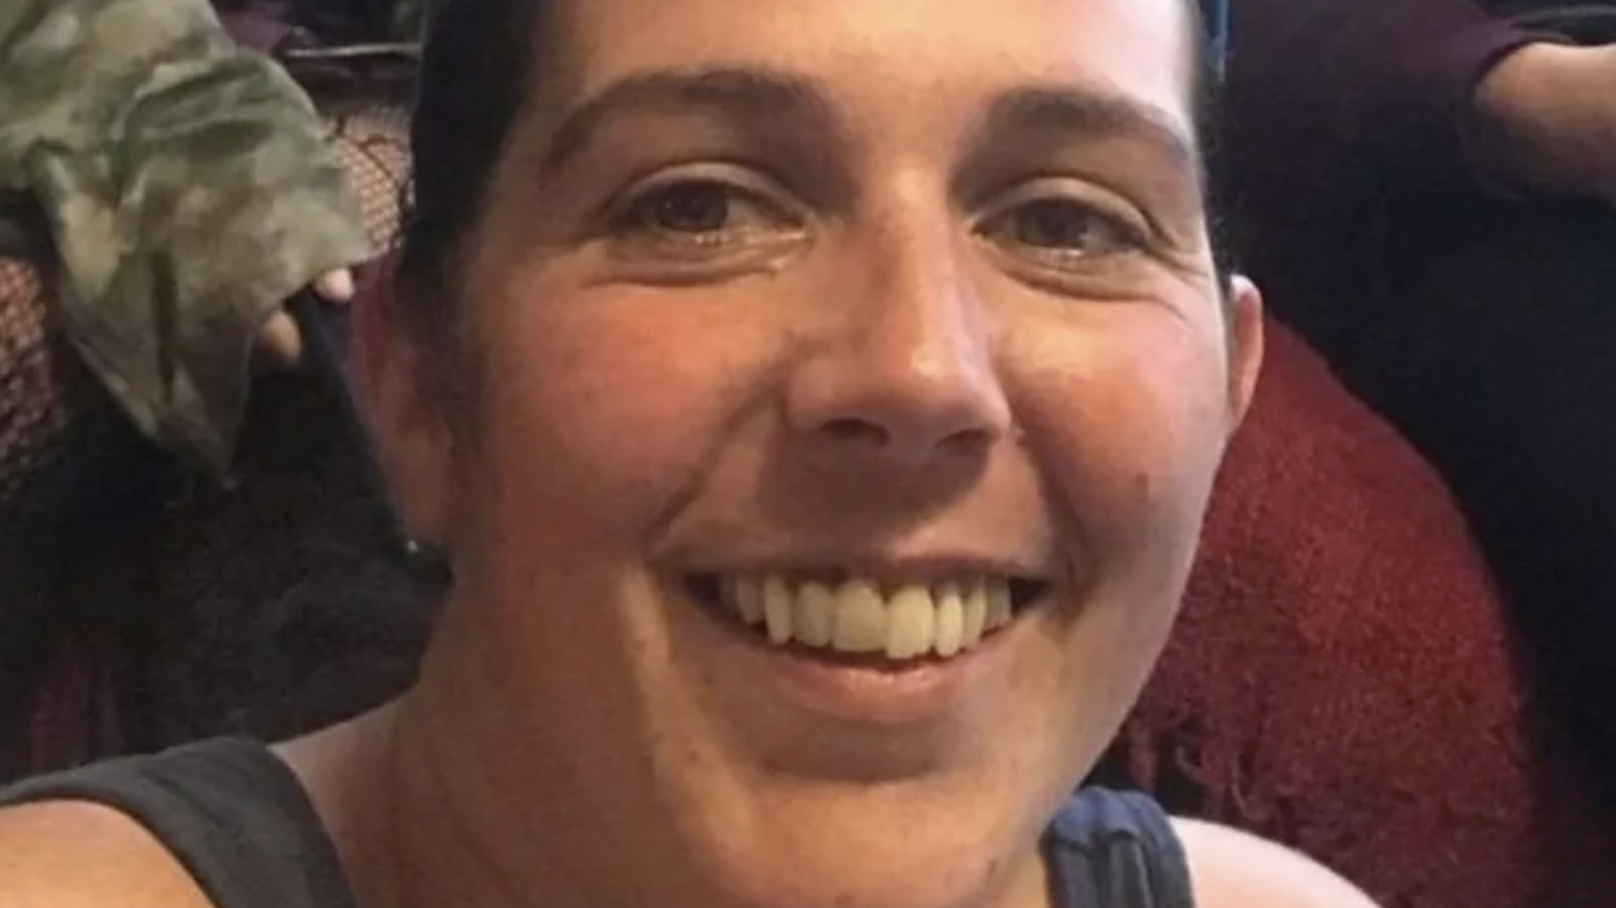 Funeral Fundraiser For Suspected Murder Victim Lorraine Cox Surpasses Target In Less Than 24